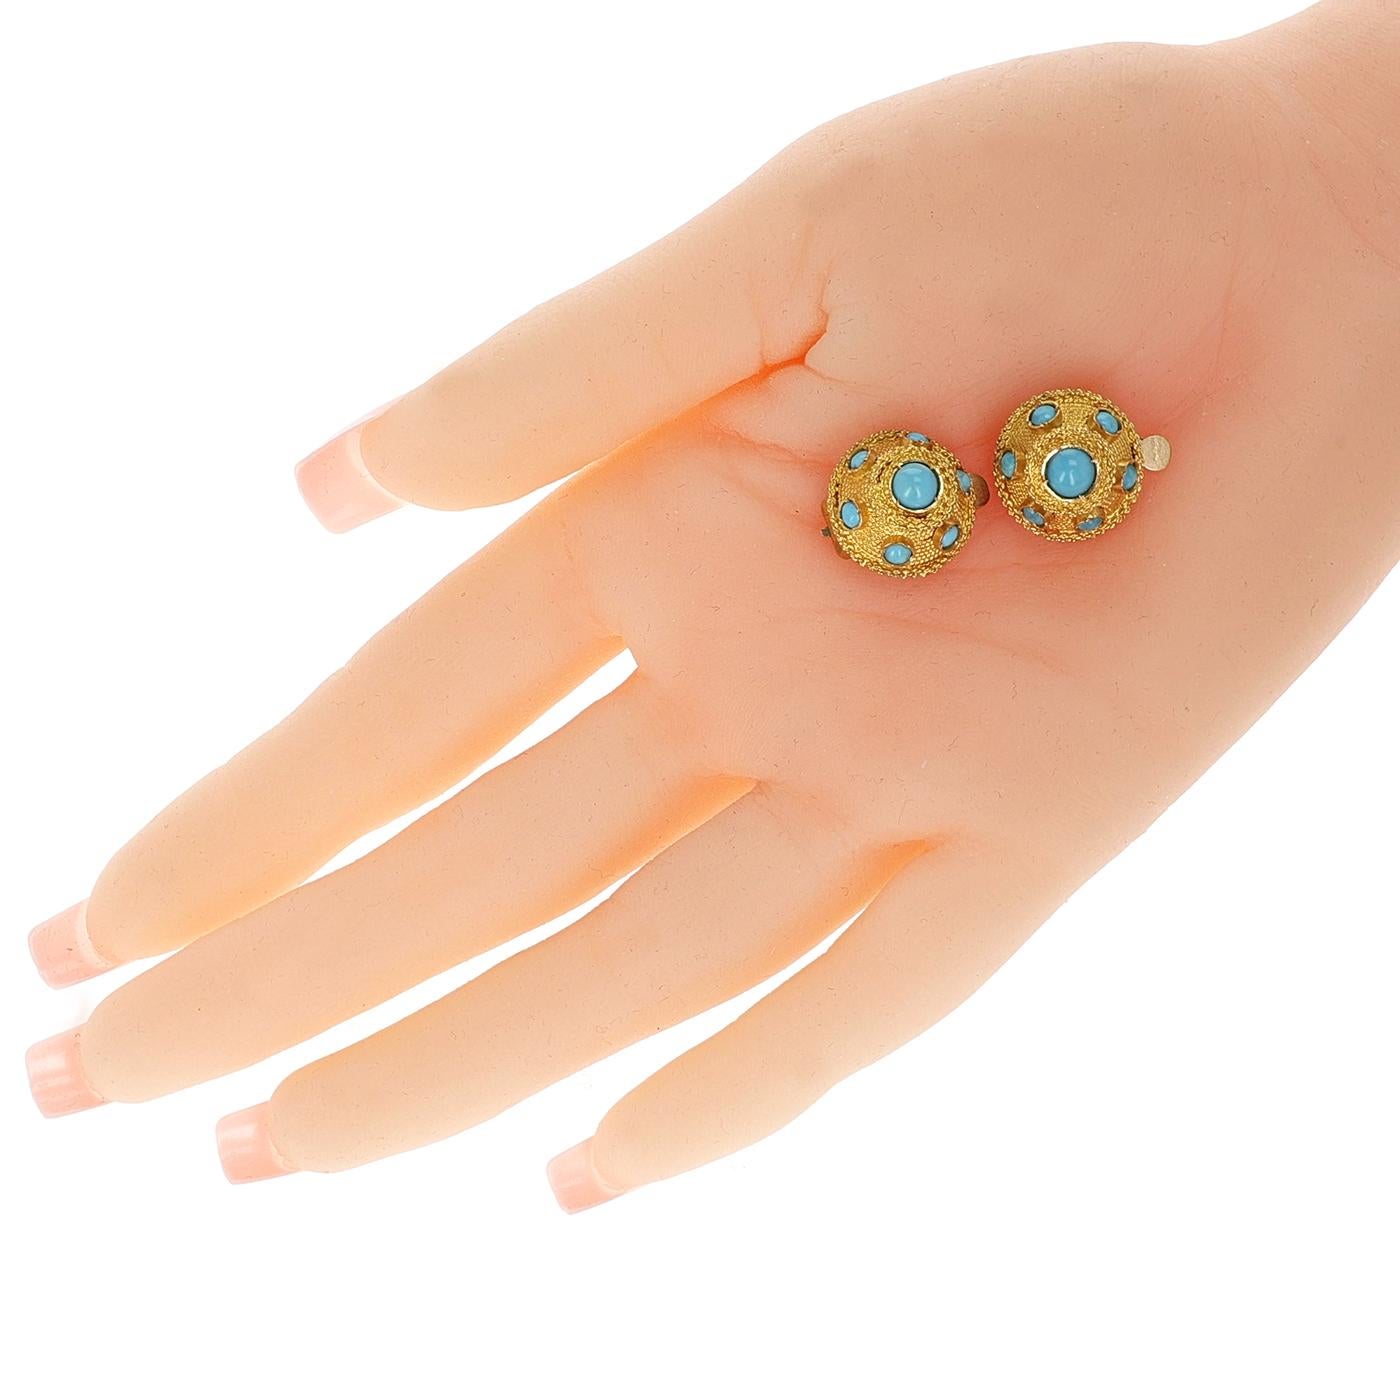 A pair of Turquoise and Gold Earrings. The set consists of: Two pairs of earrings, a ring and a bracelet.
